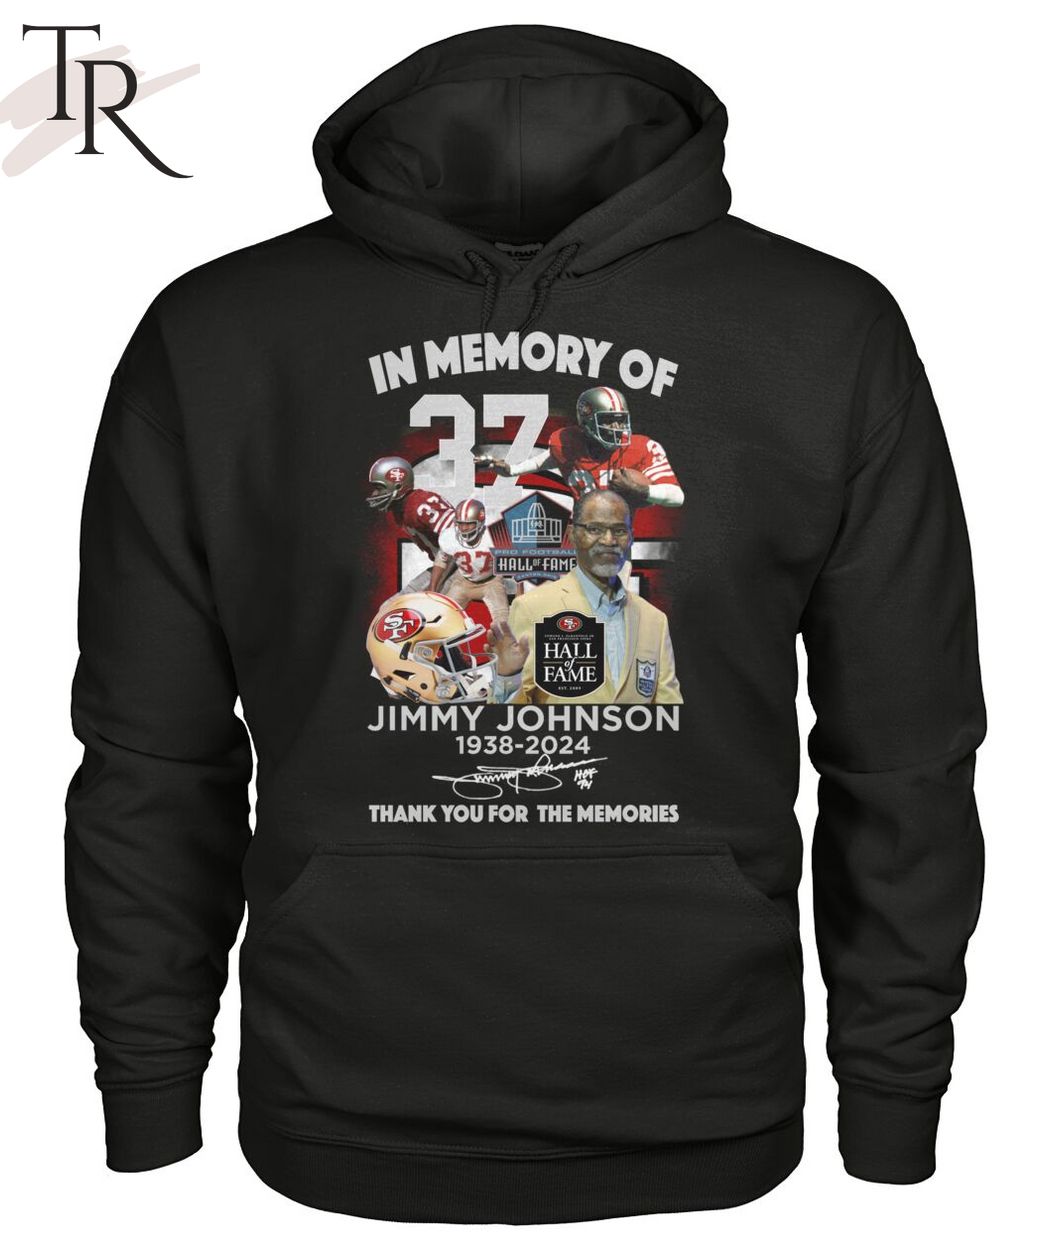 In Memory Of Jimmy Johnson 1938-2024 Thank You For The Memories T-Shirt